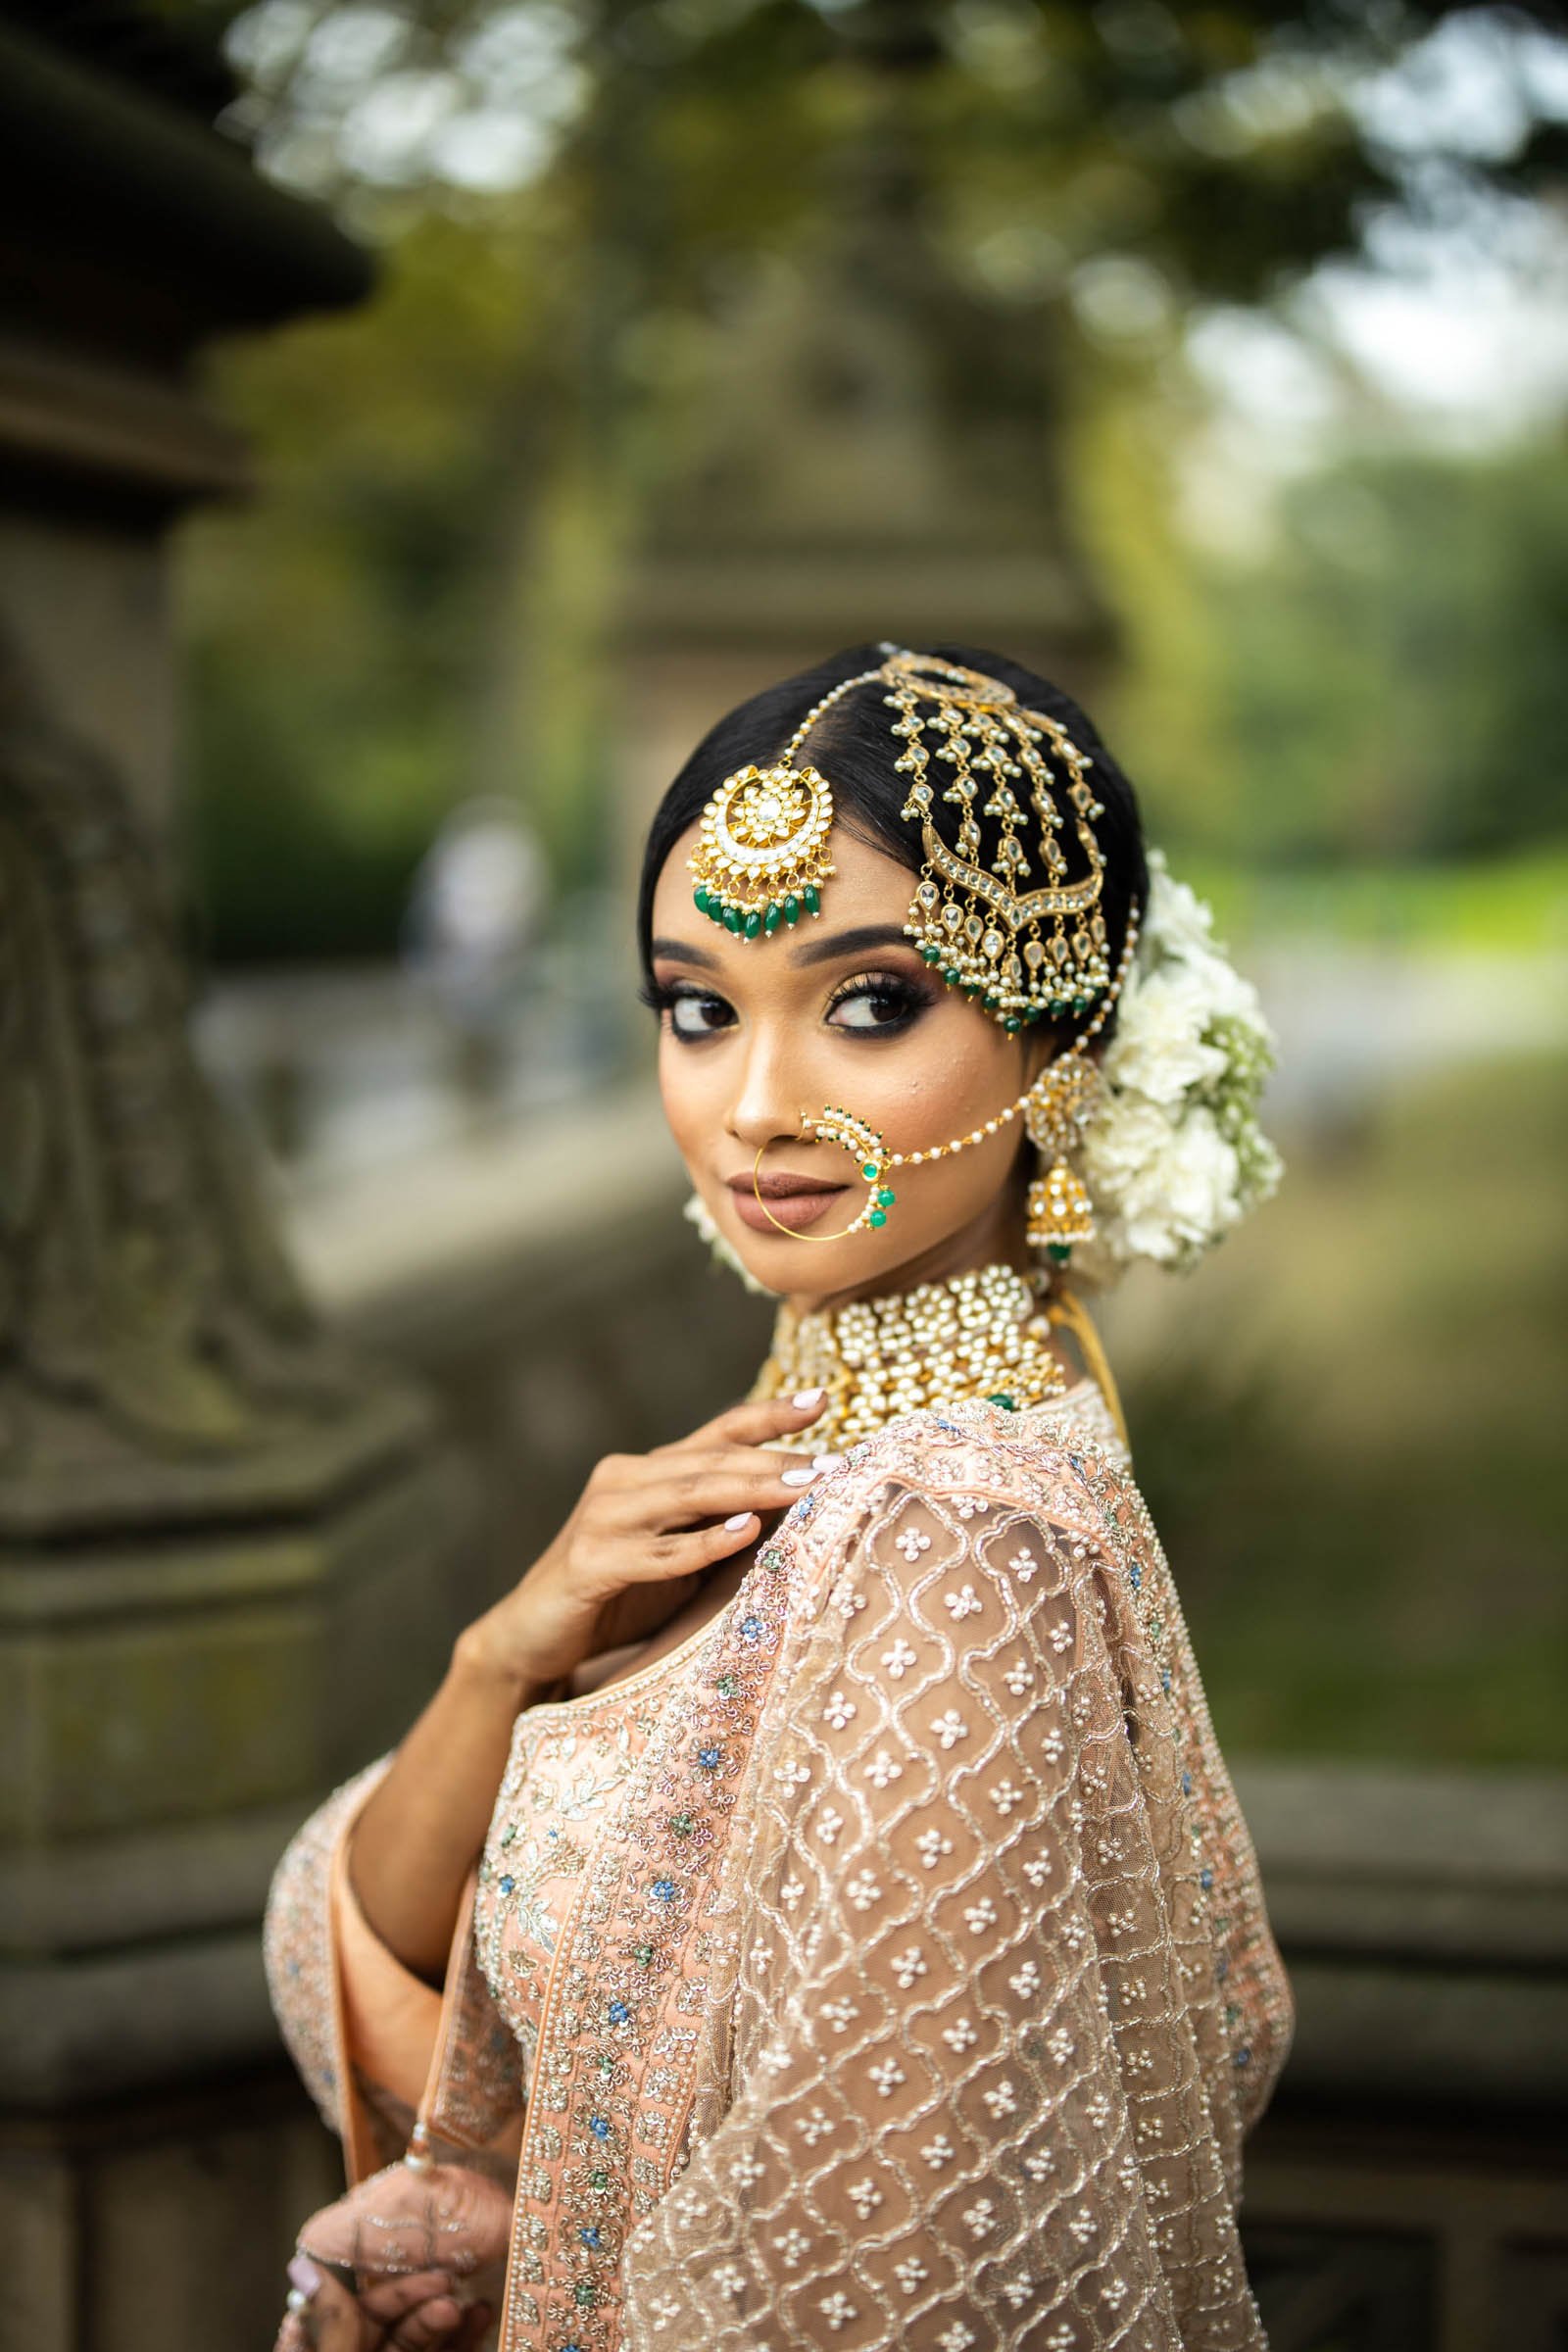 Image may contain: 1 person, standing | Bengali bridal makeup, Bridal  hairstyle indian wedding, Indian hairstyles